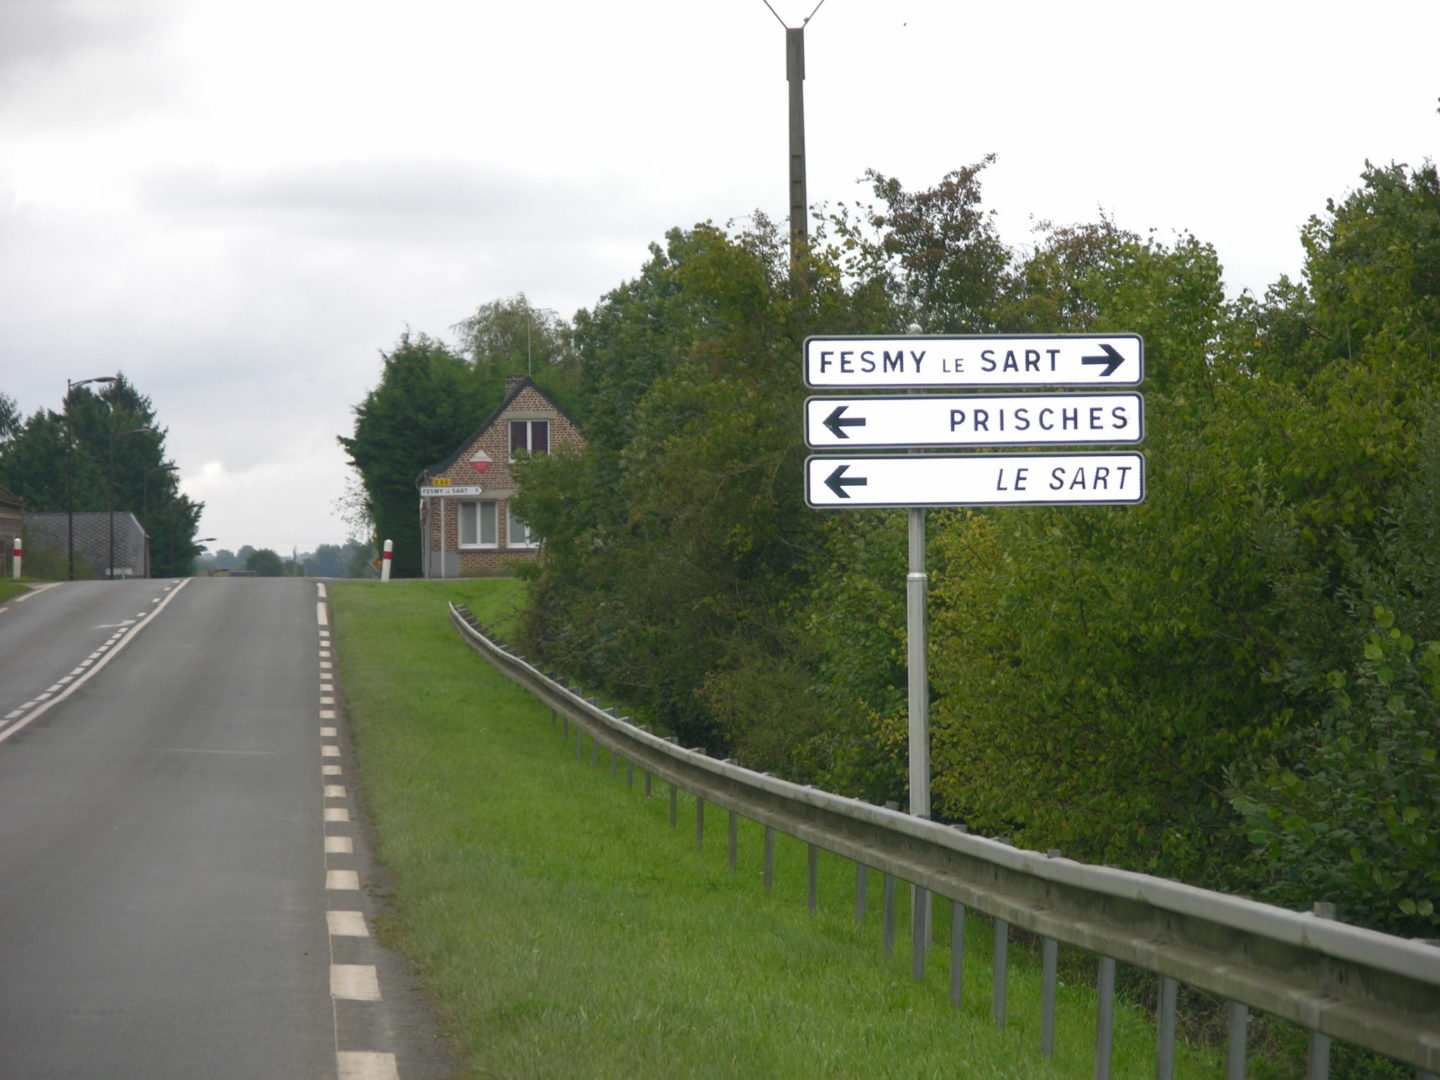 Road sign to Fesmy-Le-Sart